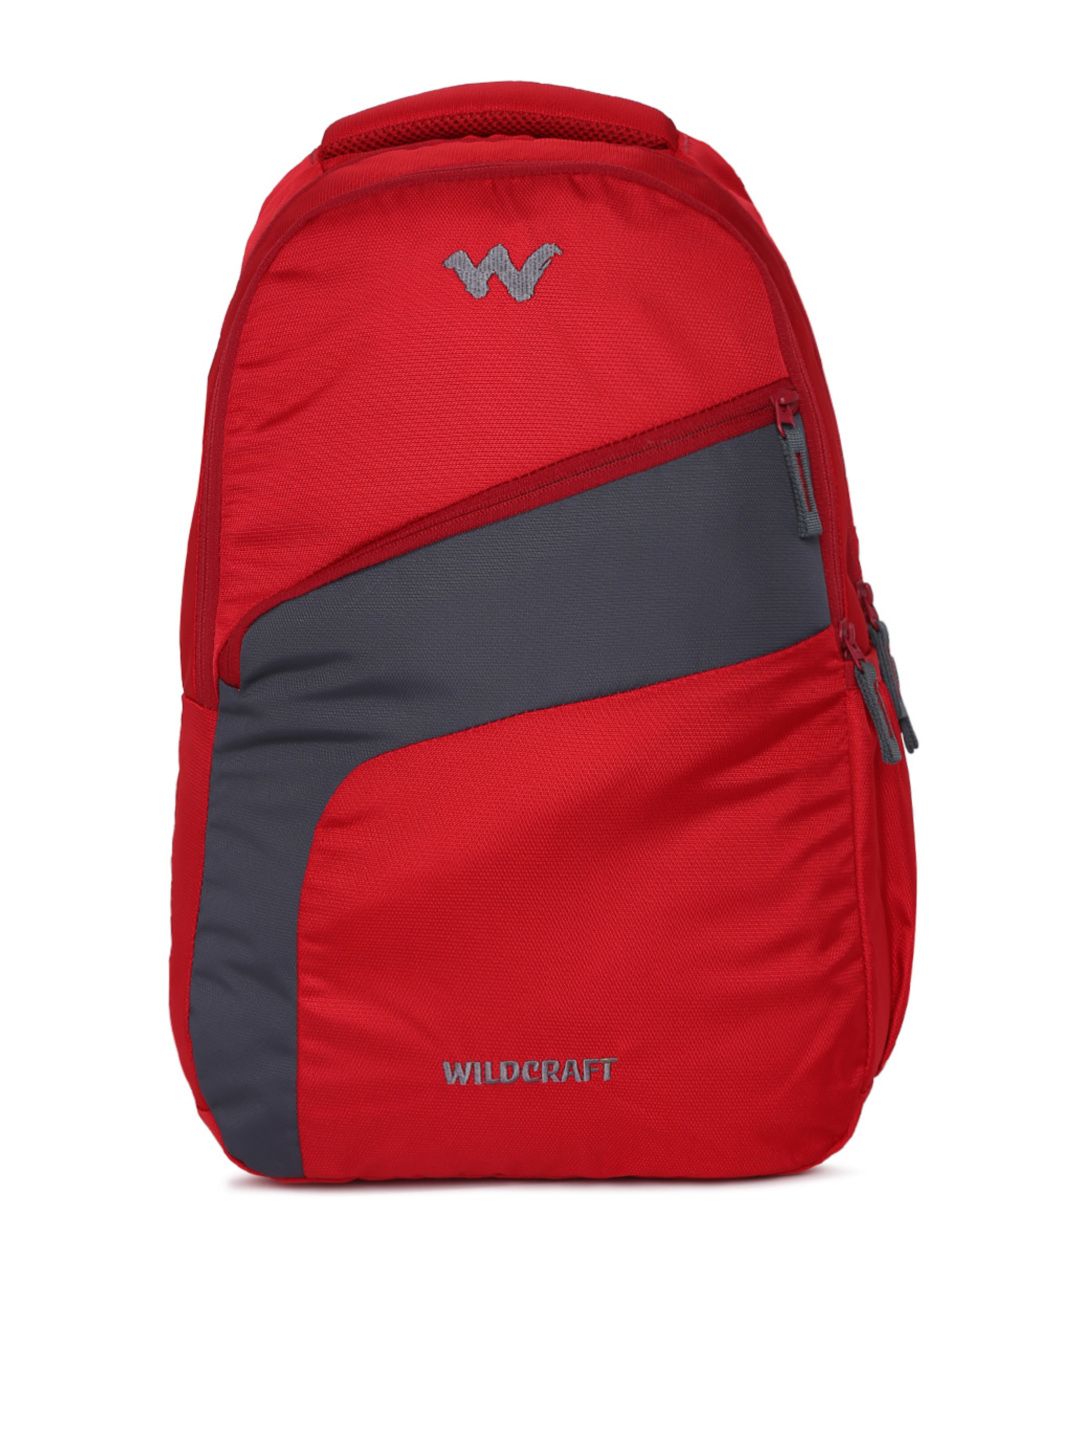 Wildcraft Unisex Red & Grey Colourblocked Virtuso Backpack Price in India